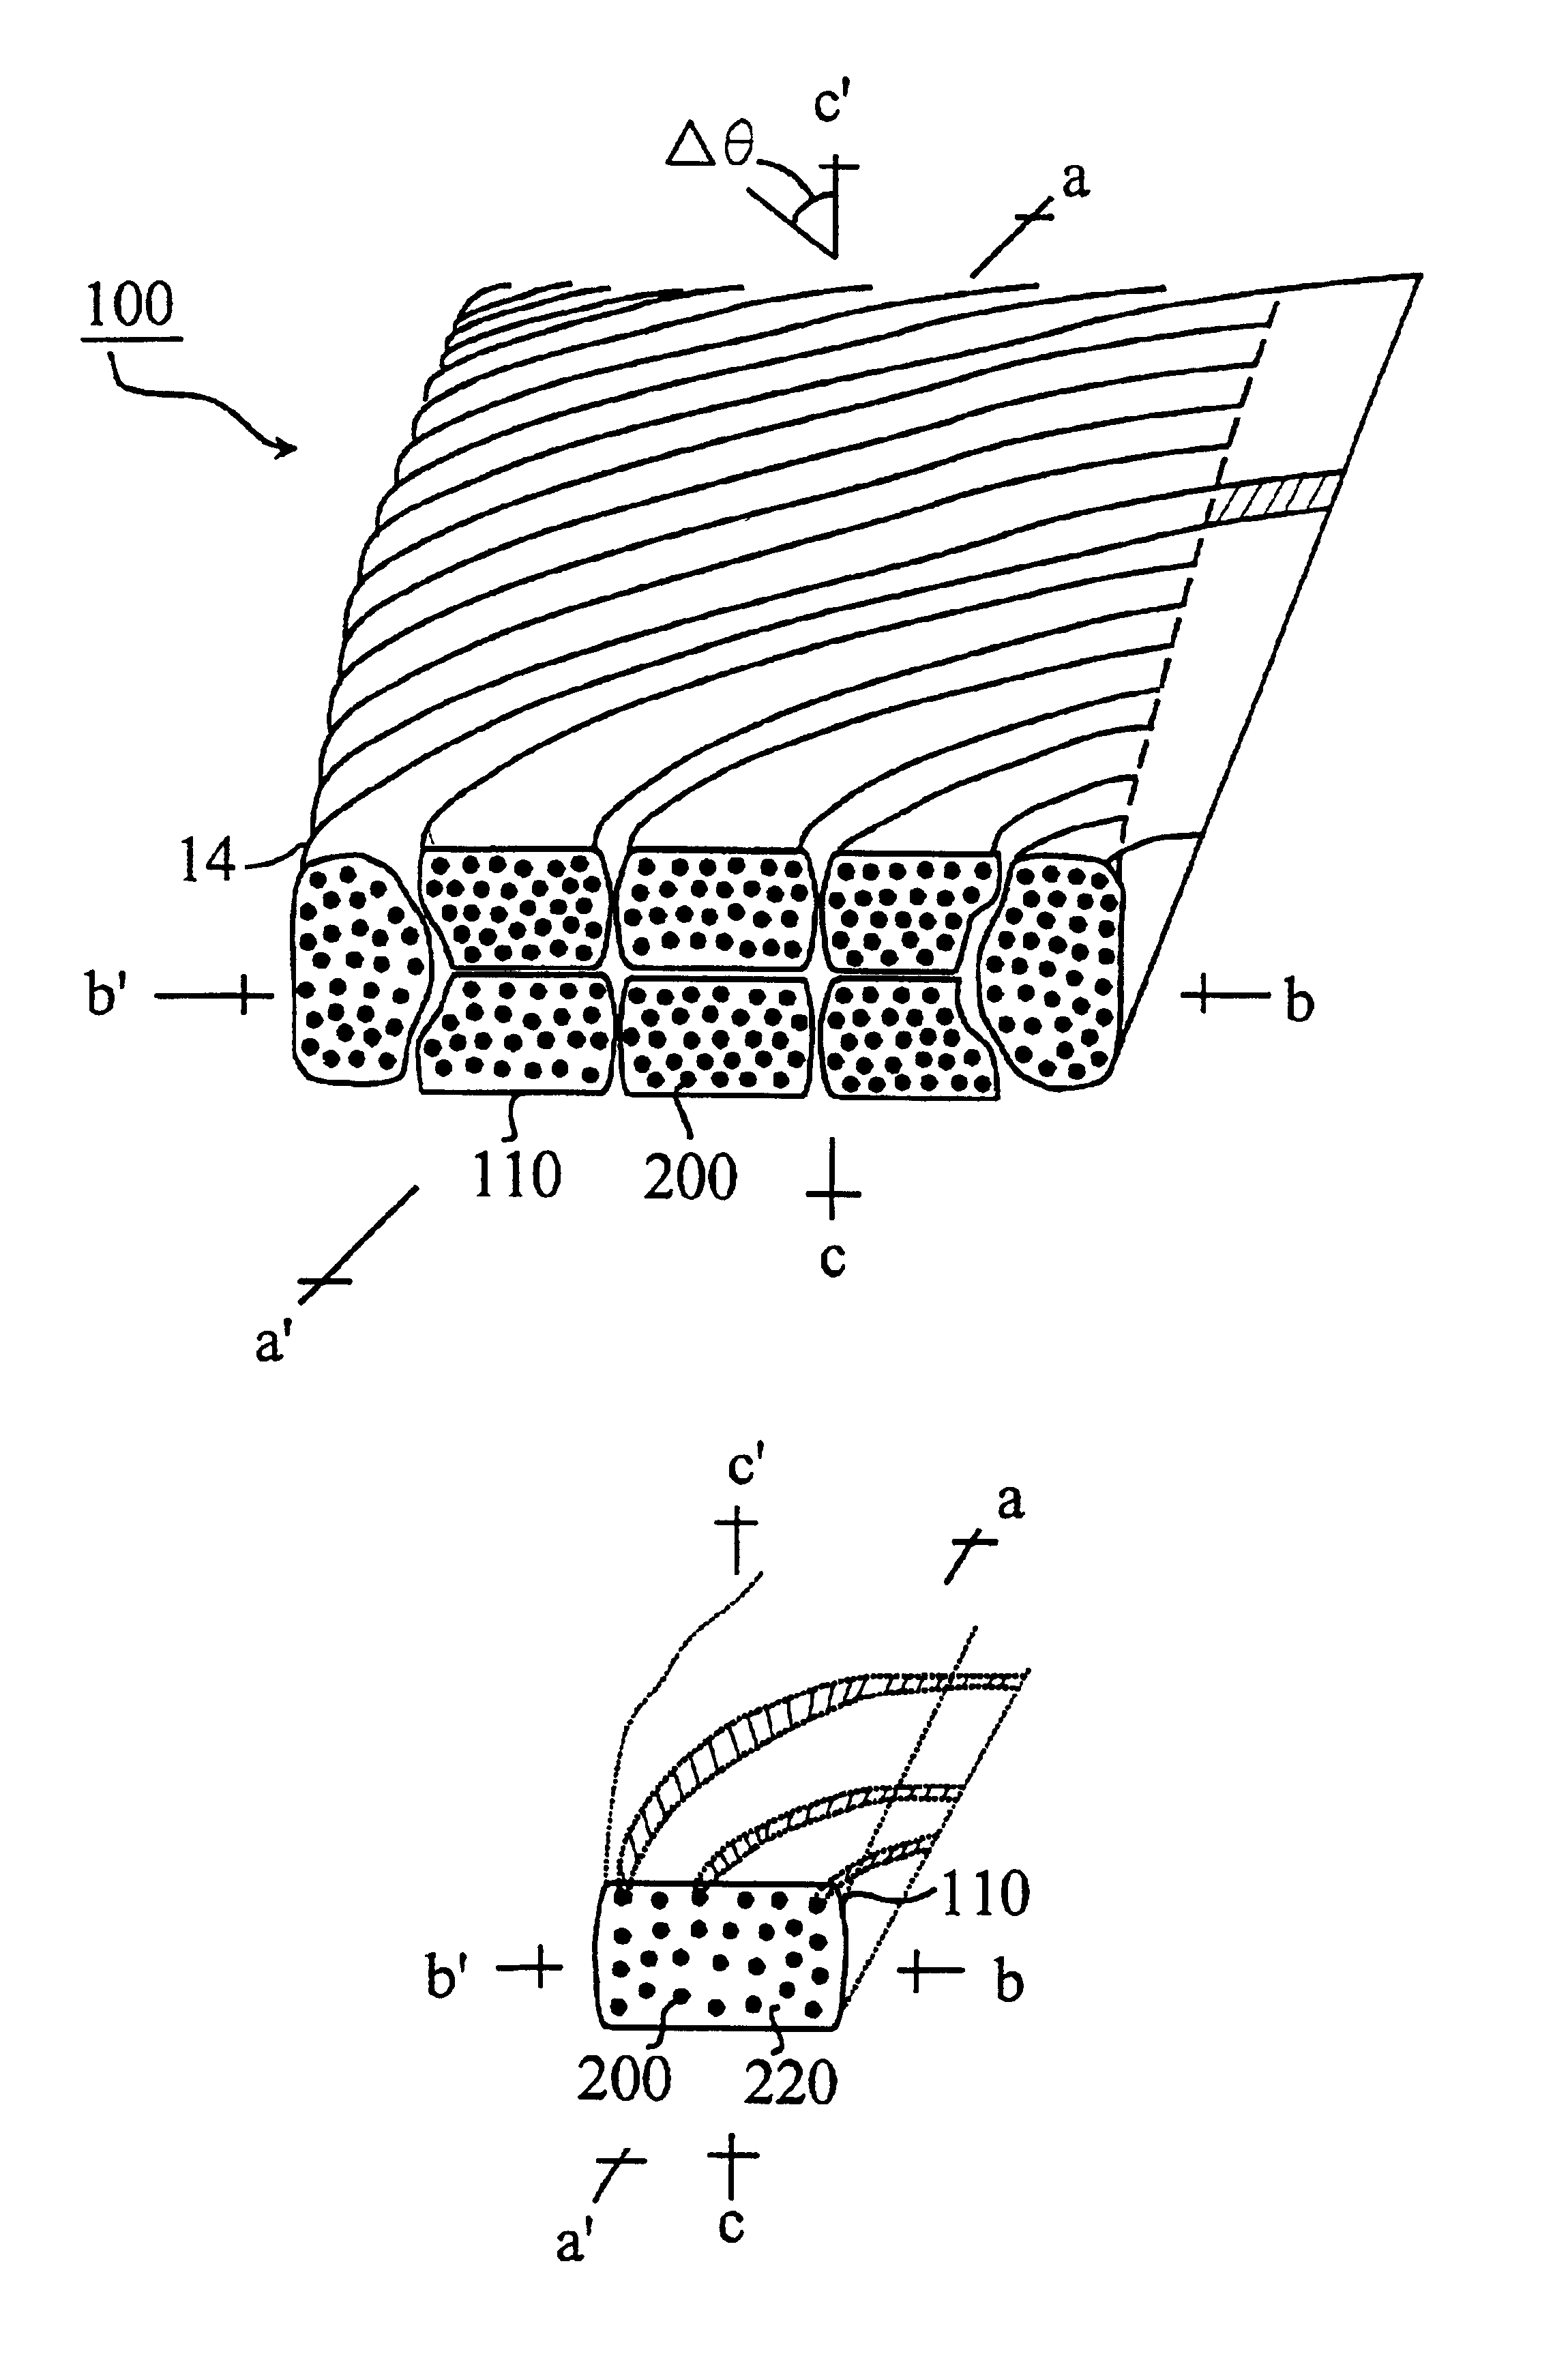 Cabled conductors containing anisotropic superconducting compounds